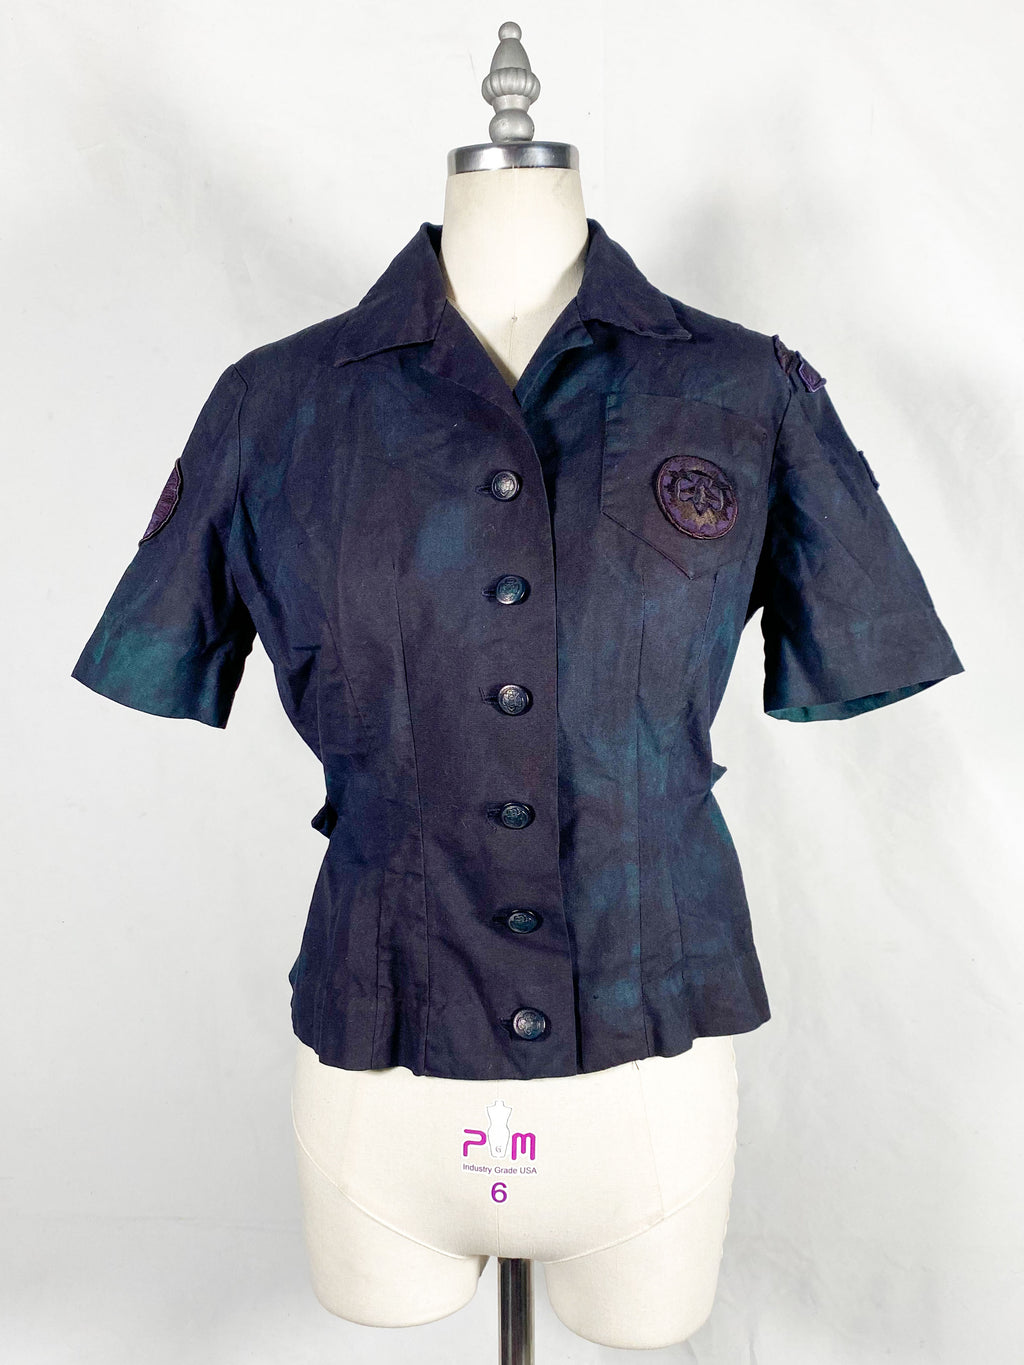 Organic Overdyed 1950s Girl Scout Button Up Uniform (Women's US Small)